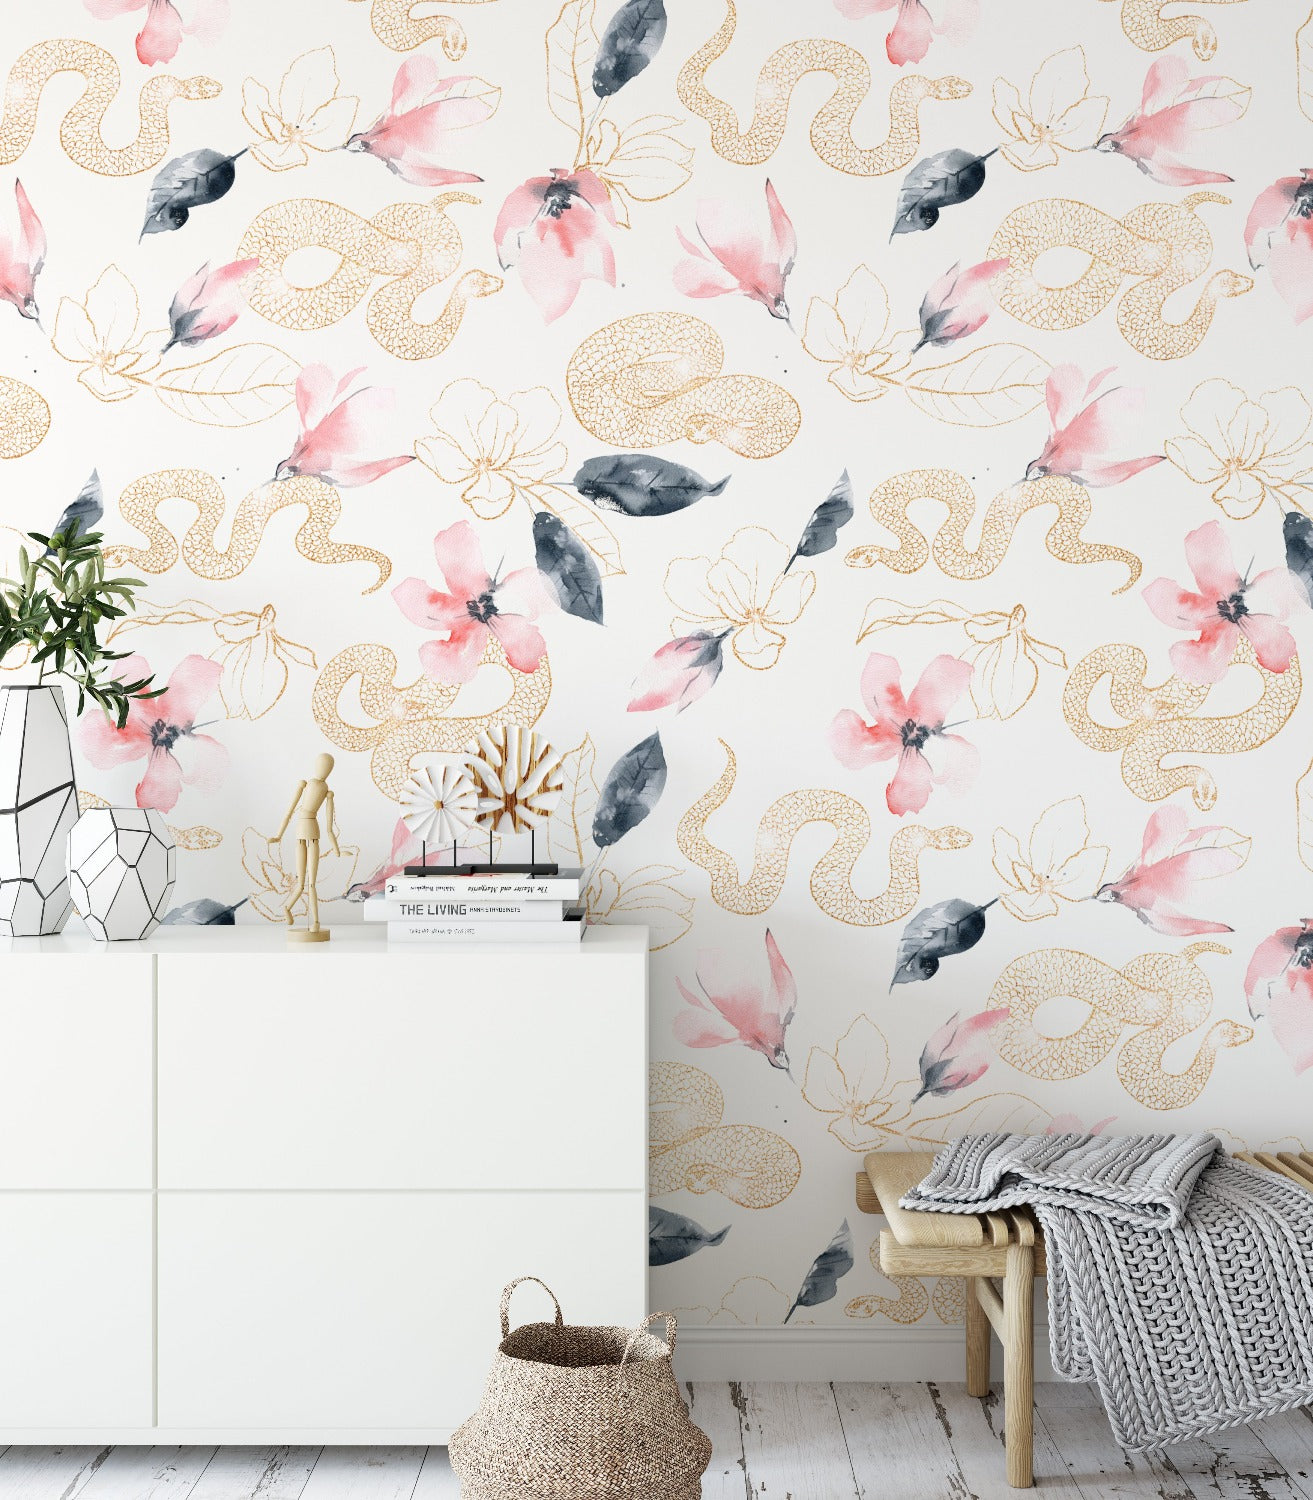 Elegant interior with Gold Snake Wallpaper featuring pink flowers and golden snakes on white background